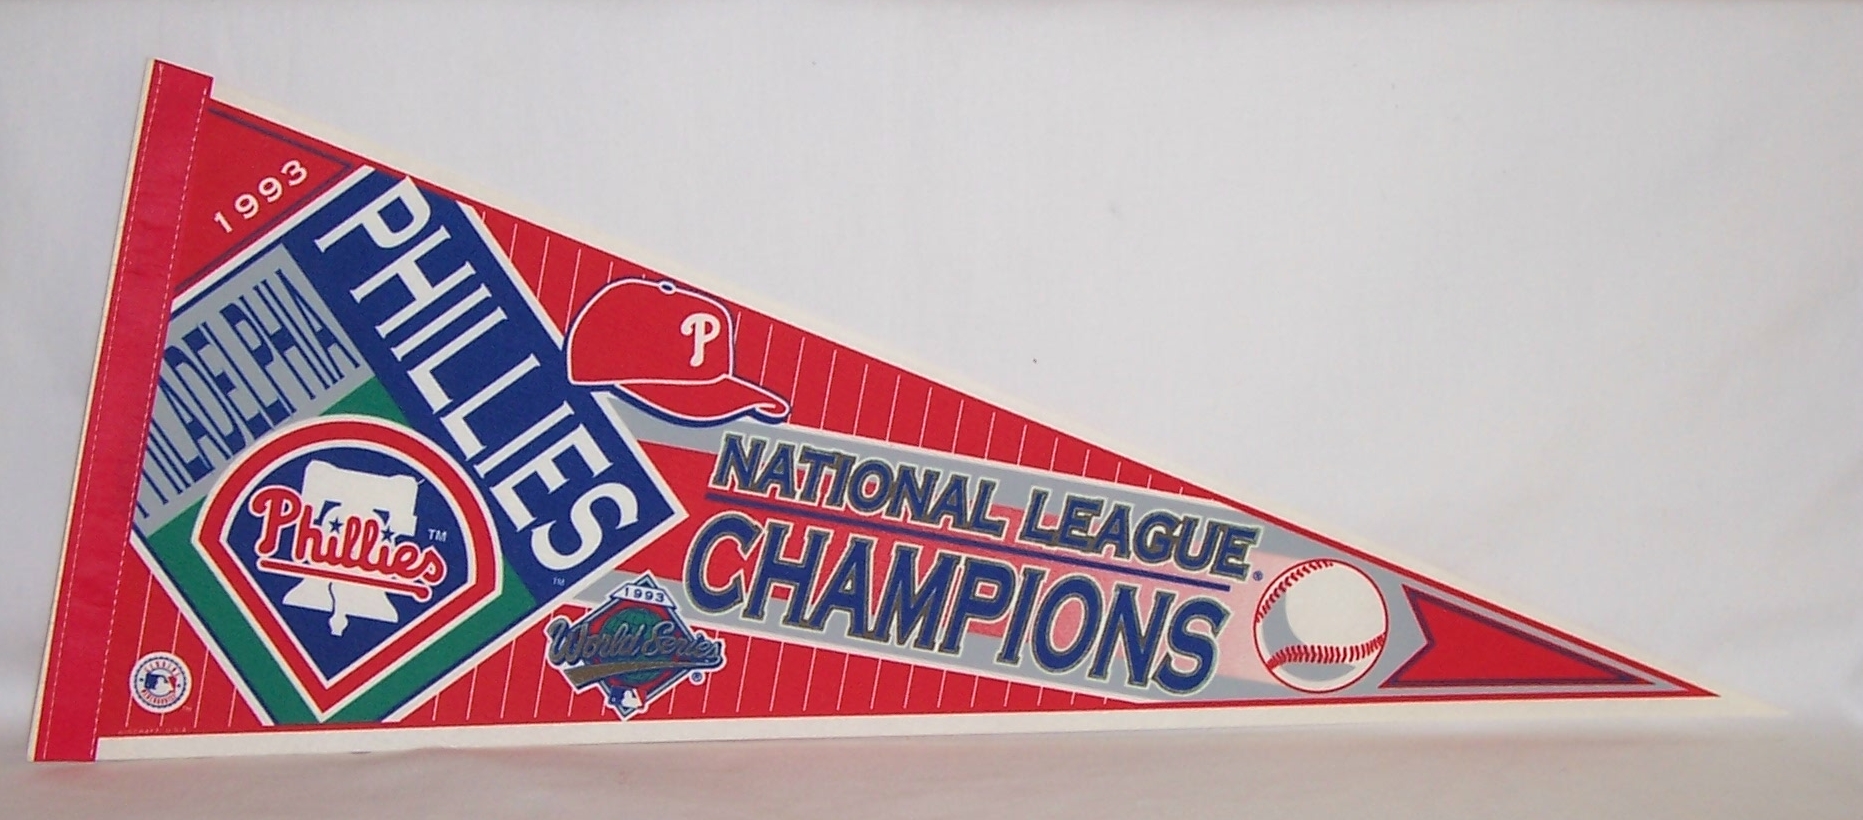 The Phillies Win The Pennant…Sans Mullets